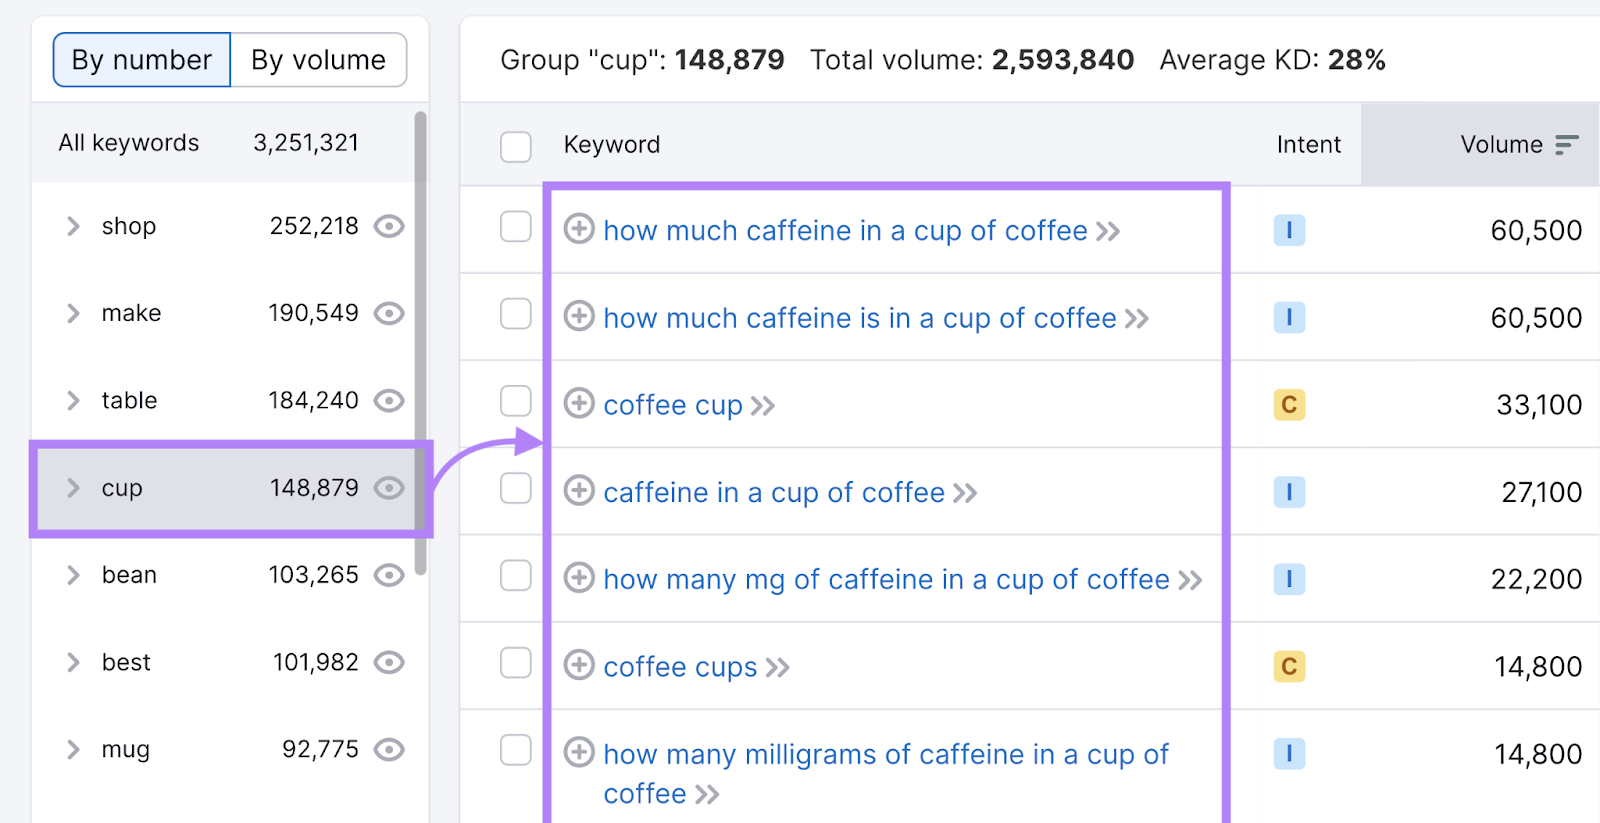 "Cup" group selected which filters all keywords to only show those related to "cup" term